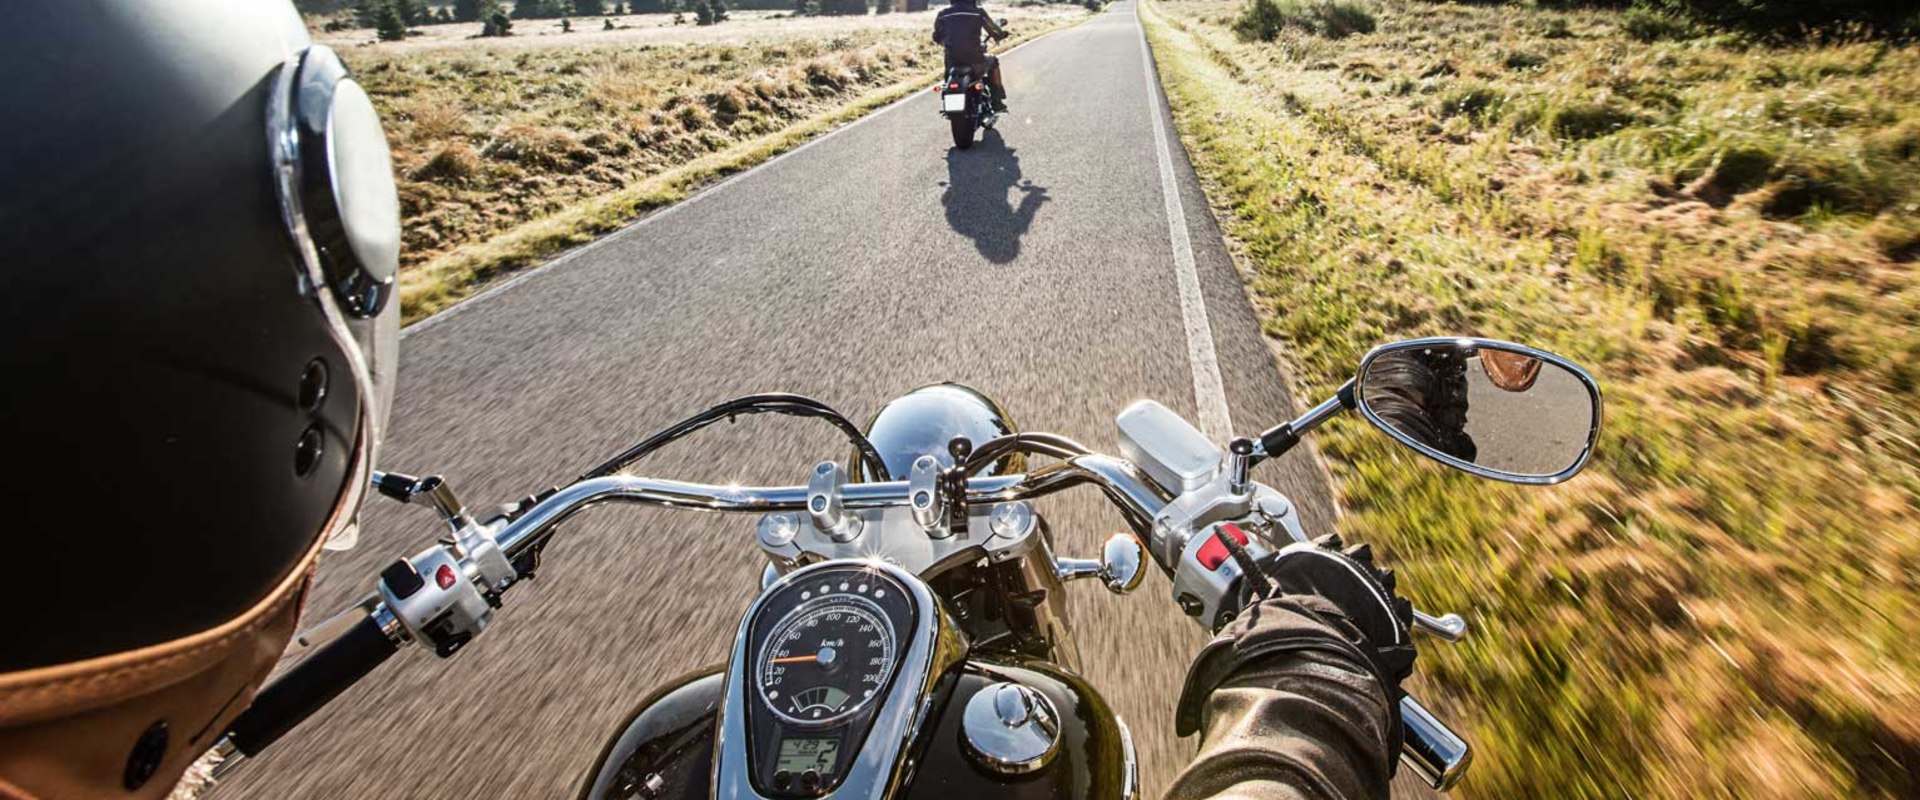 How Much Does Motorcycle Insurance Cost With American Family?